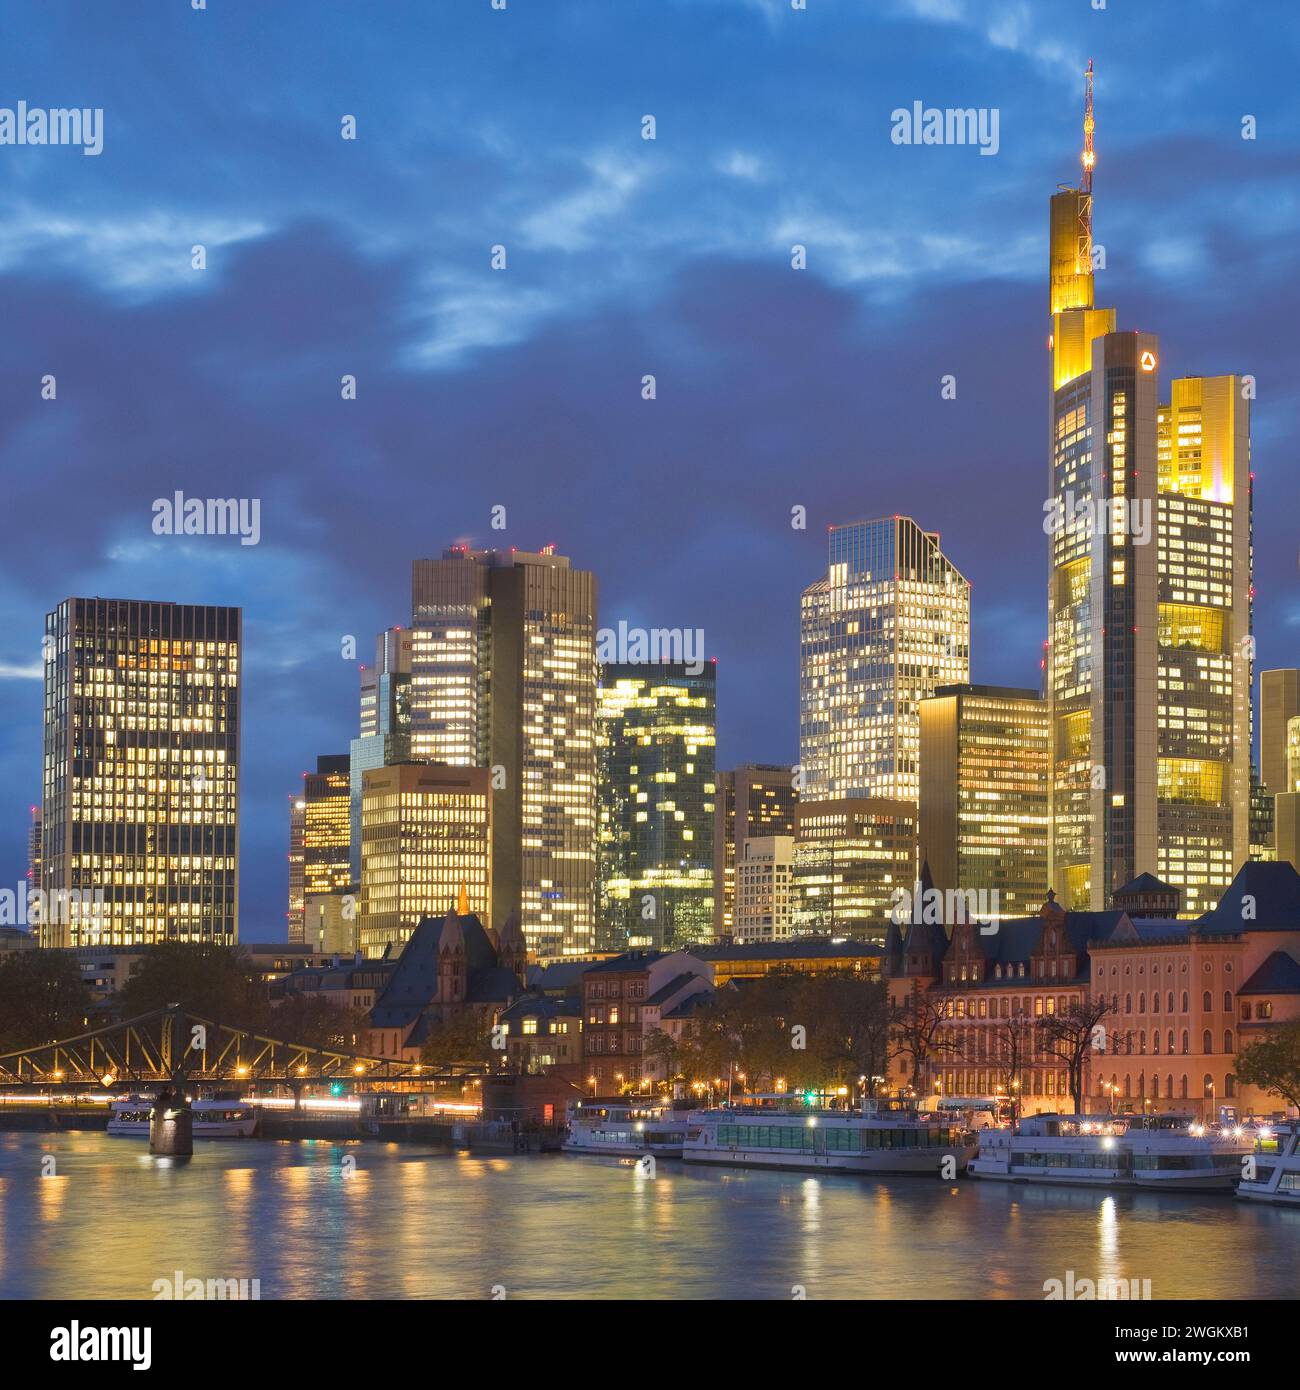 City view in the evening with Main and banking district, Germany, Hesse, Frankfurt am Main Stock Photo